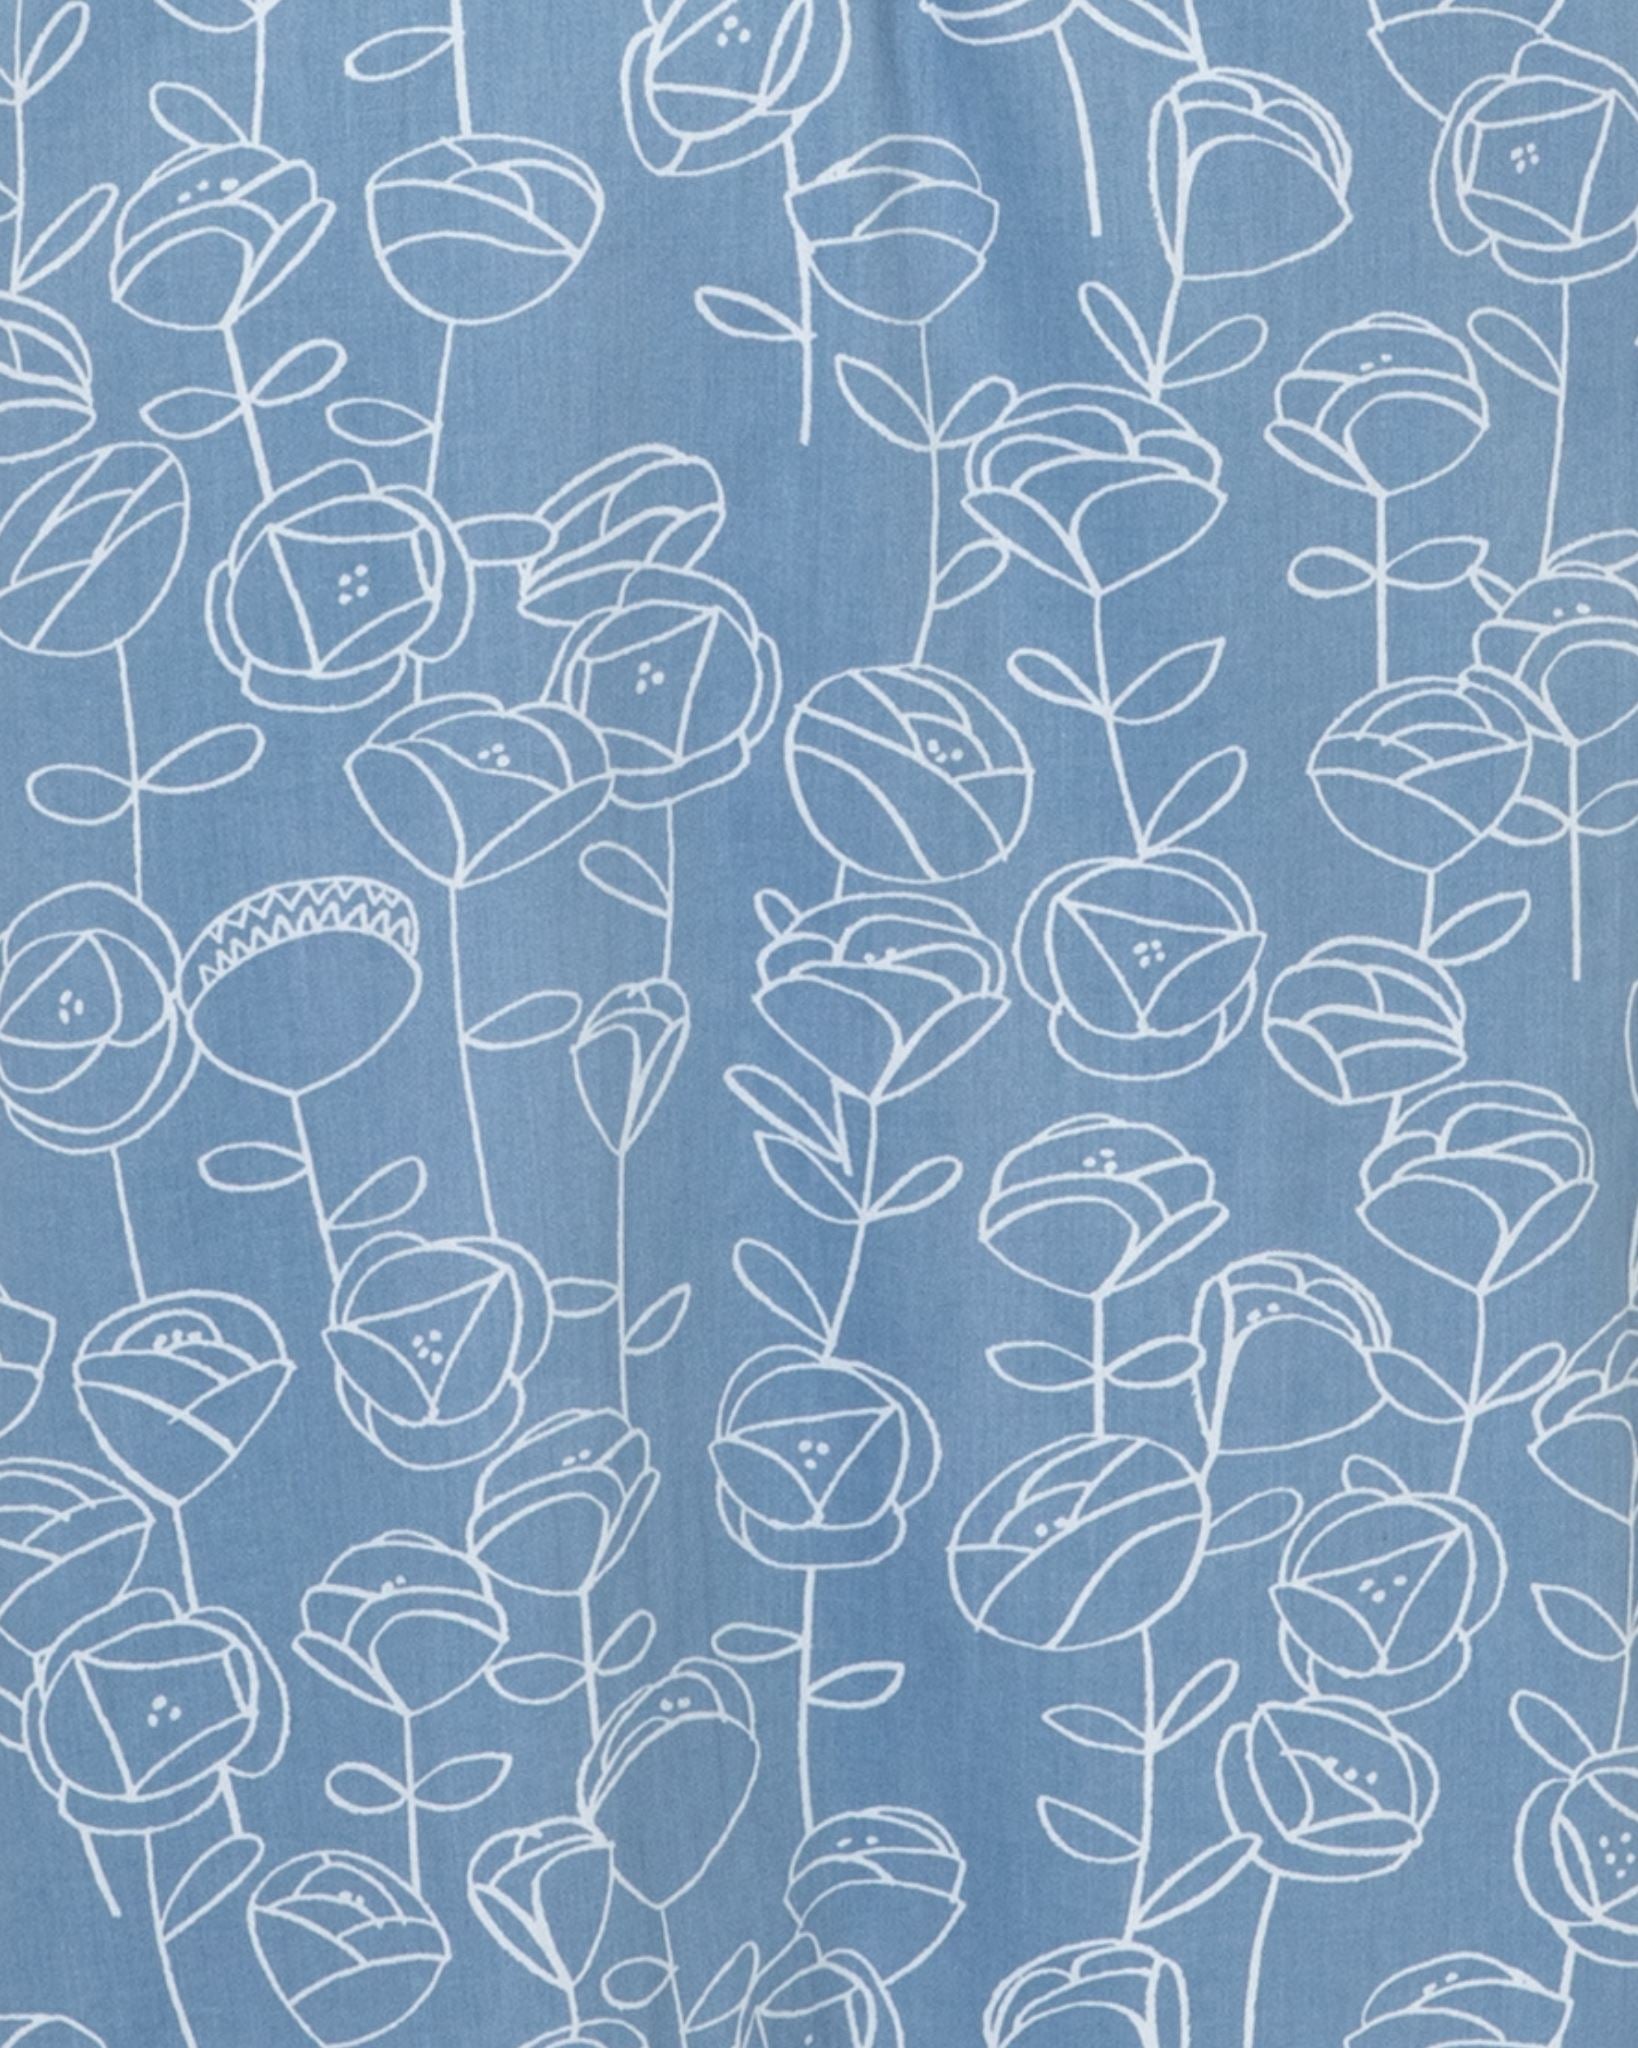 Fabric swatch of blue and white floral luxury organic cotton from Yawn.